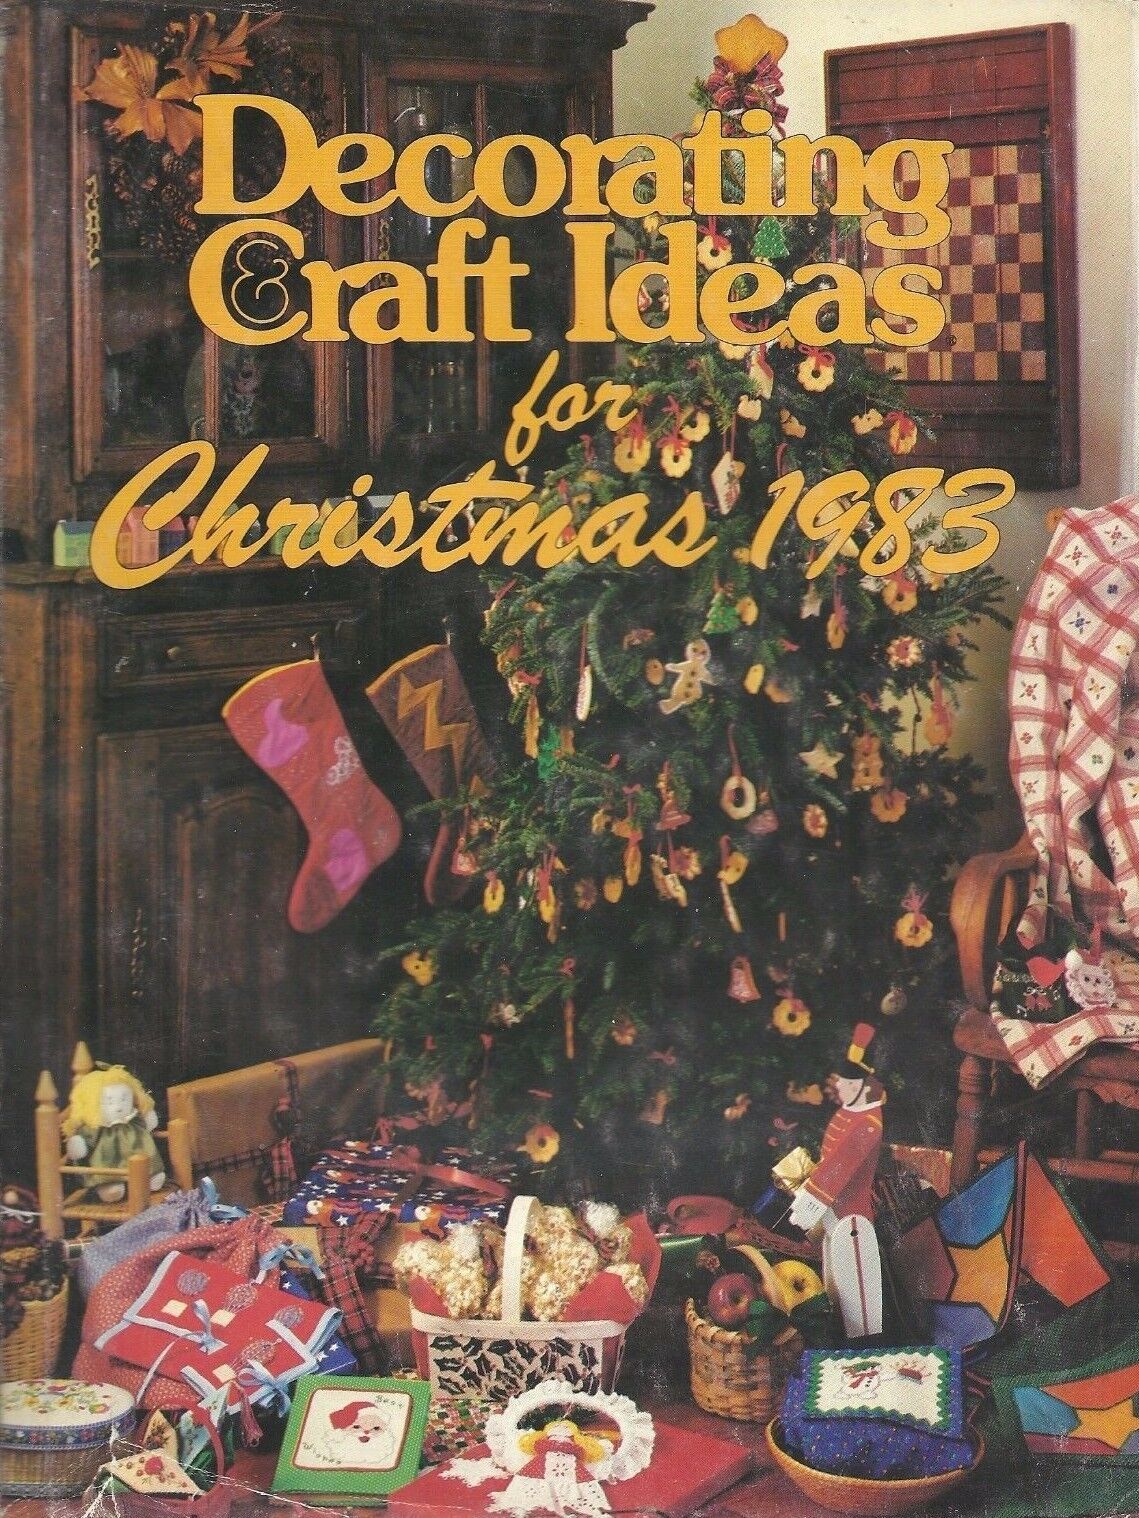 Primary image for Decorating and Craft Ideas for Christmas 1983  Hardcover